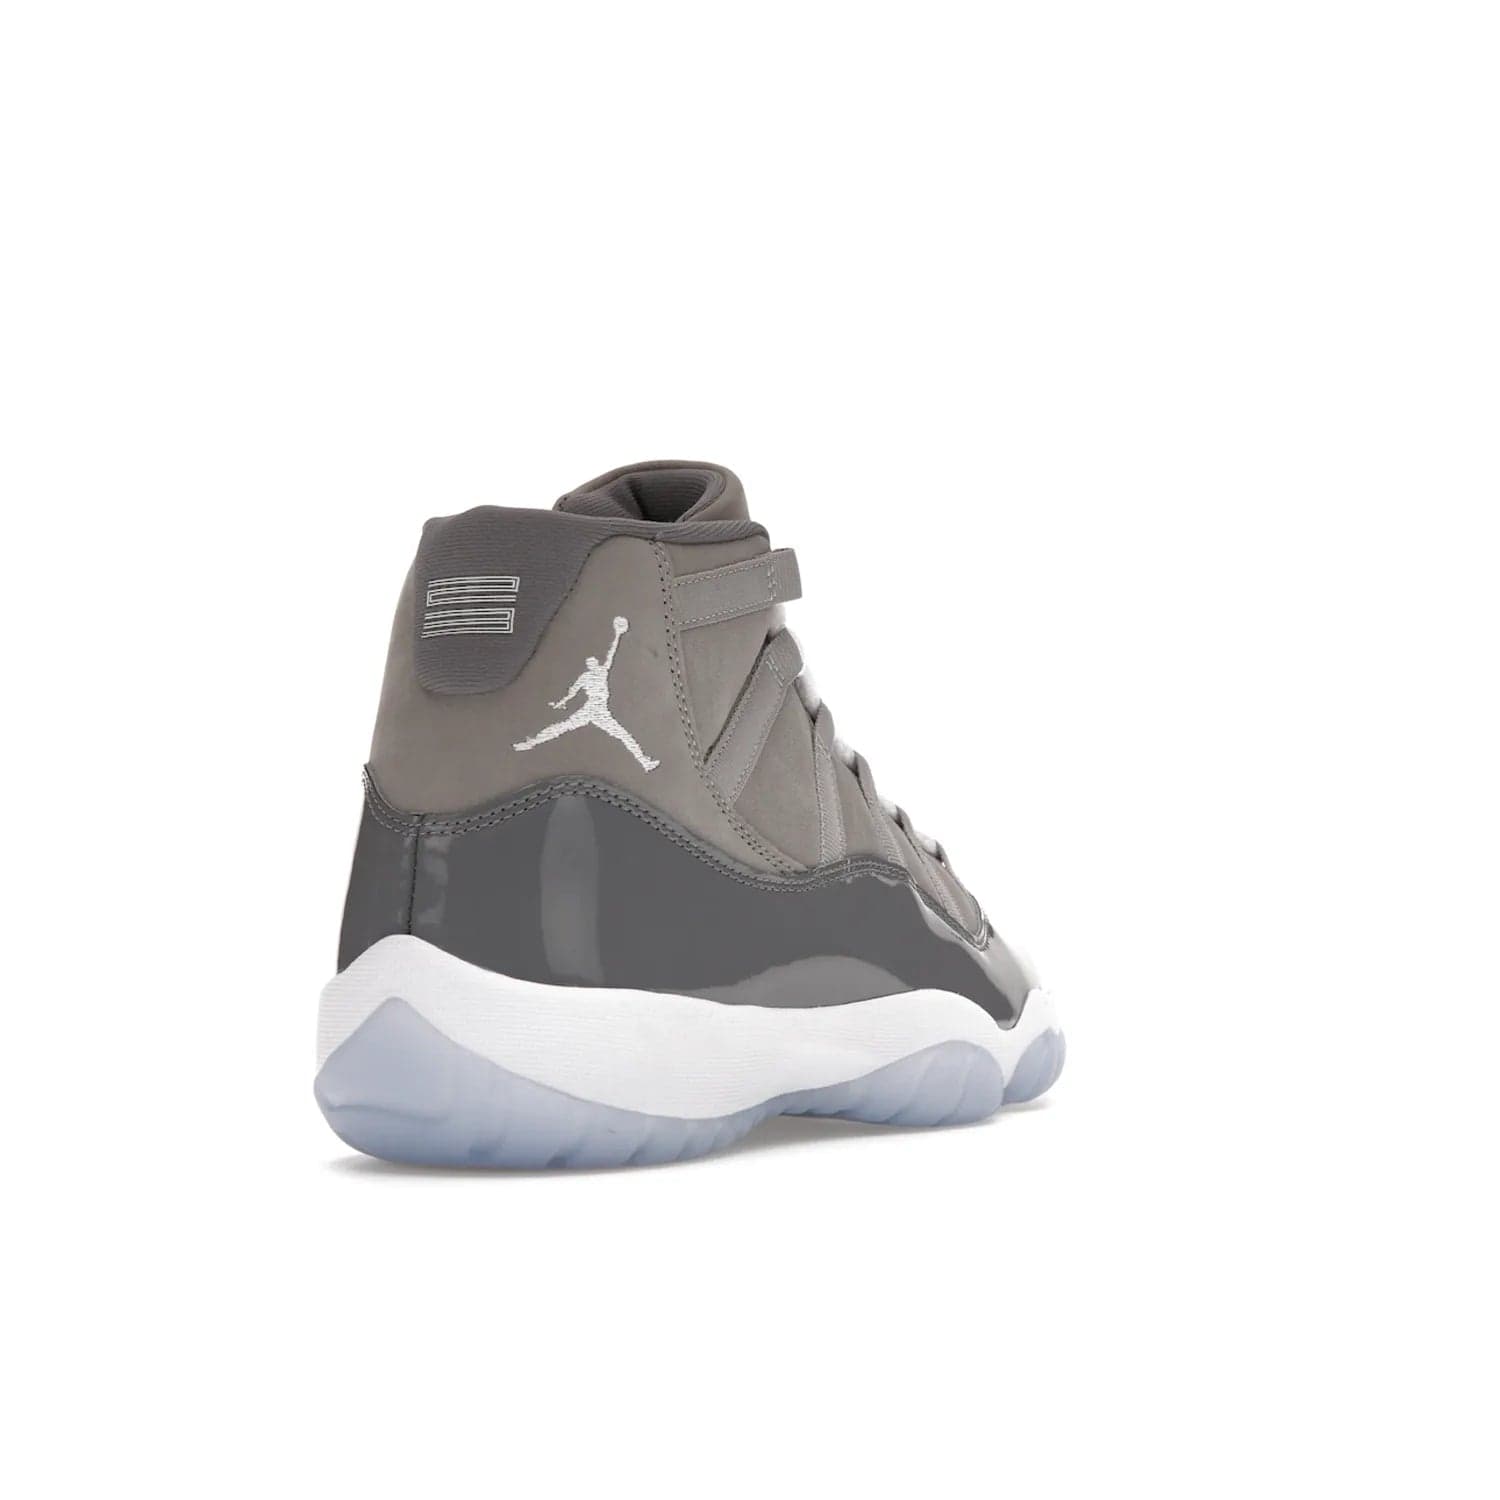 Jordan 11 Retro Cool Grey (2021) - Image 31 - Only at www.BallersClubKickz.com - Shop the Air Jordan 11 Retro Cool Grey (2021) for a must-have sneaker with a Cool Grey Durabuck upper, patent leather overlays, signature Jumpman embroidery, a white midsole, icy blue translucent outsole, and Multi-Color accents.  Released in December 2021 for $225.